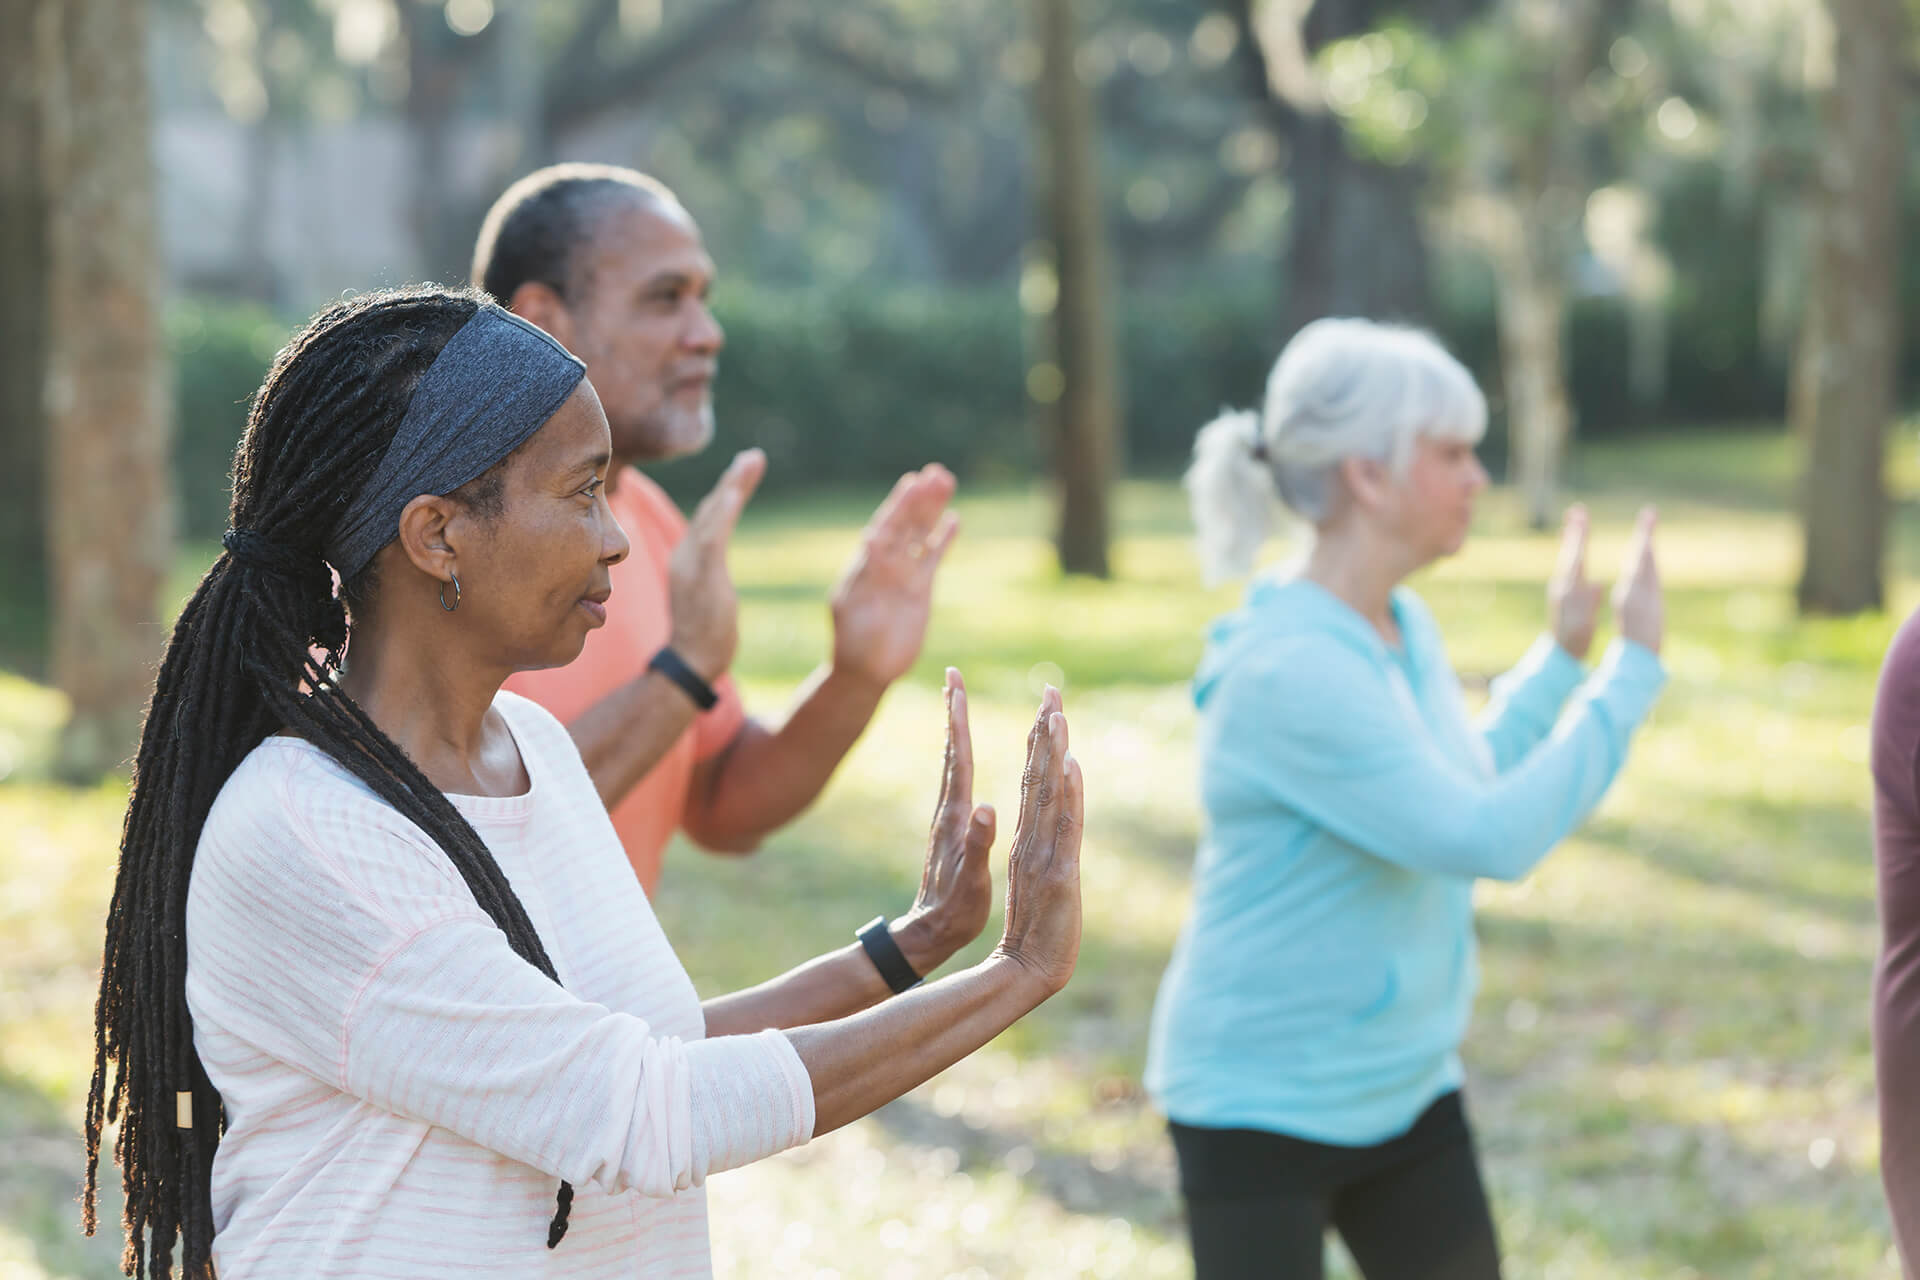 Kaiser Permanente Seniors, Boomers Discuss Their Keys to Healthy Aging – Exercise